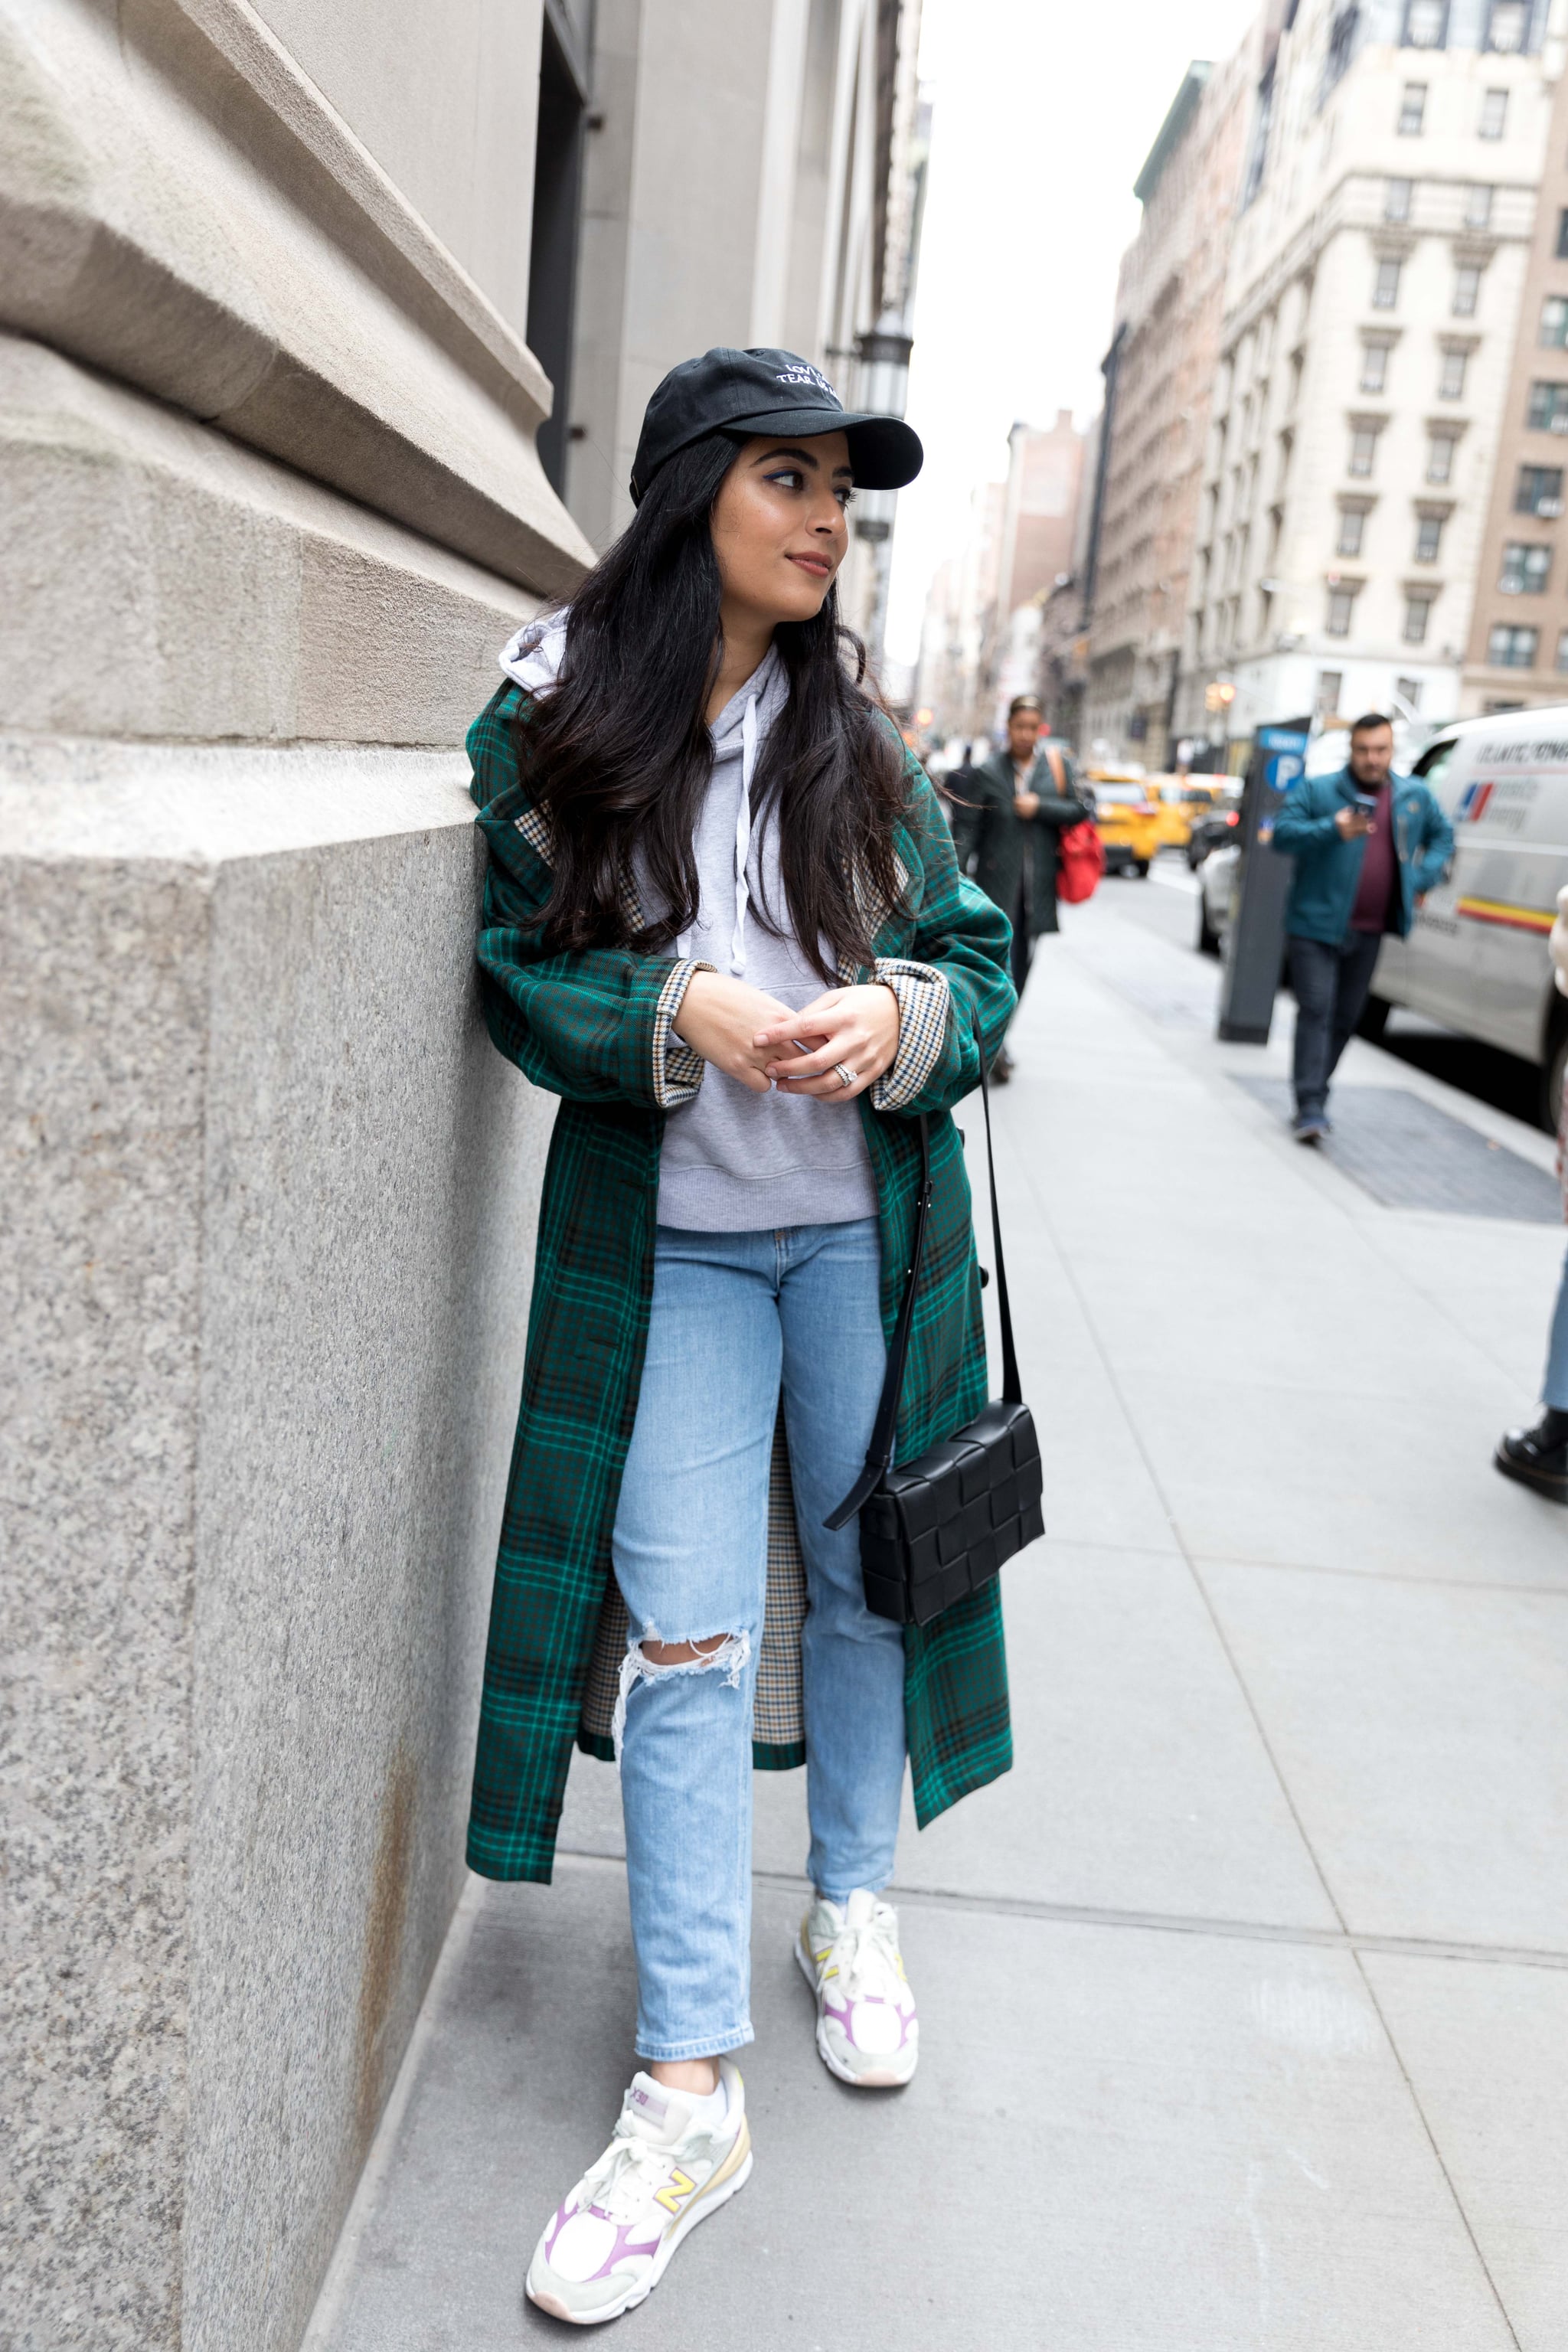 Look 1: Sporty Casual | I'm a Fashion Editor, and This Is Why I'm Over  Dressing Up For Fashion Week | POPSUGAR Fashion Photo 2